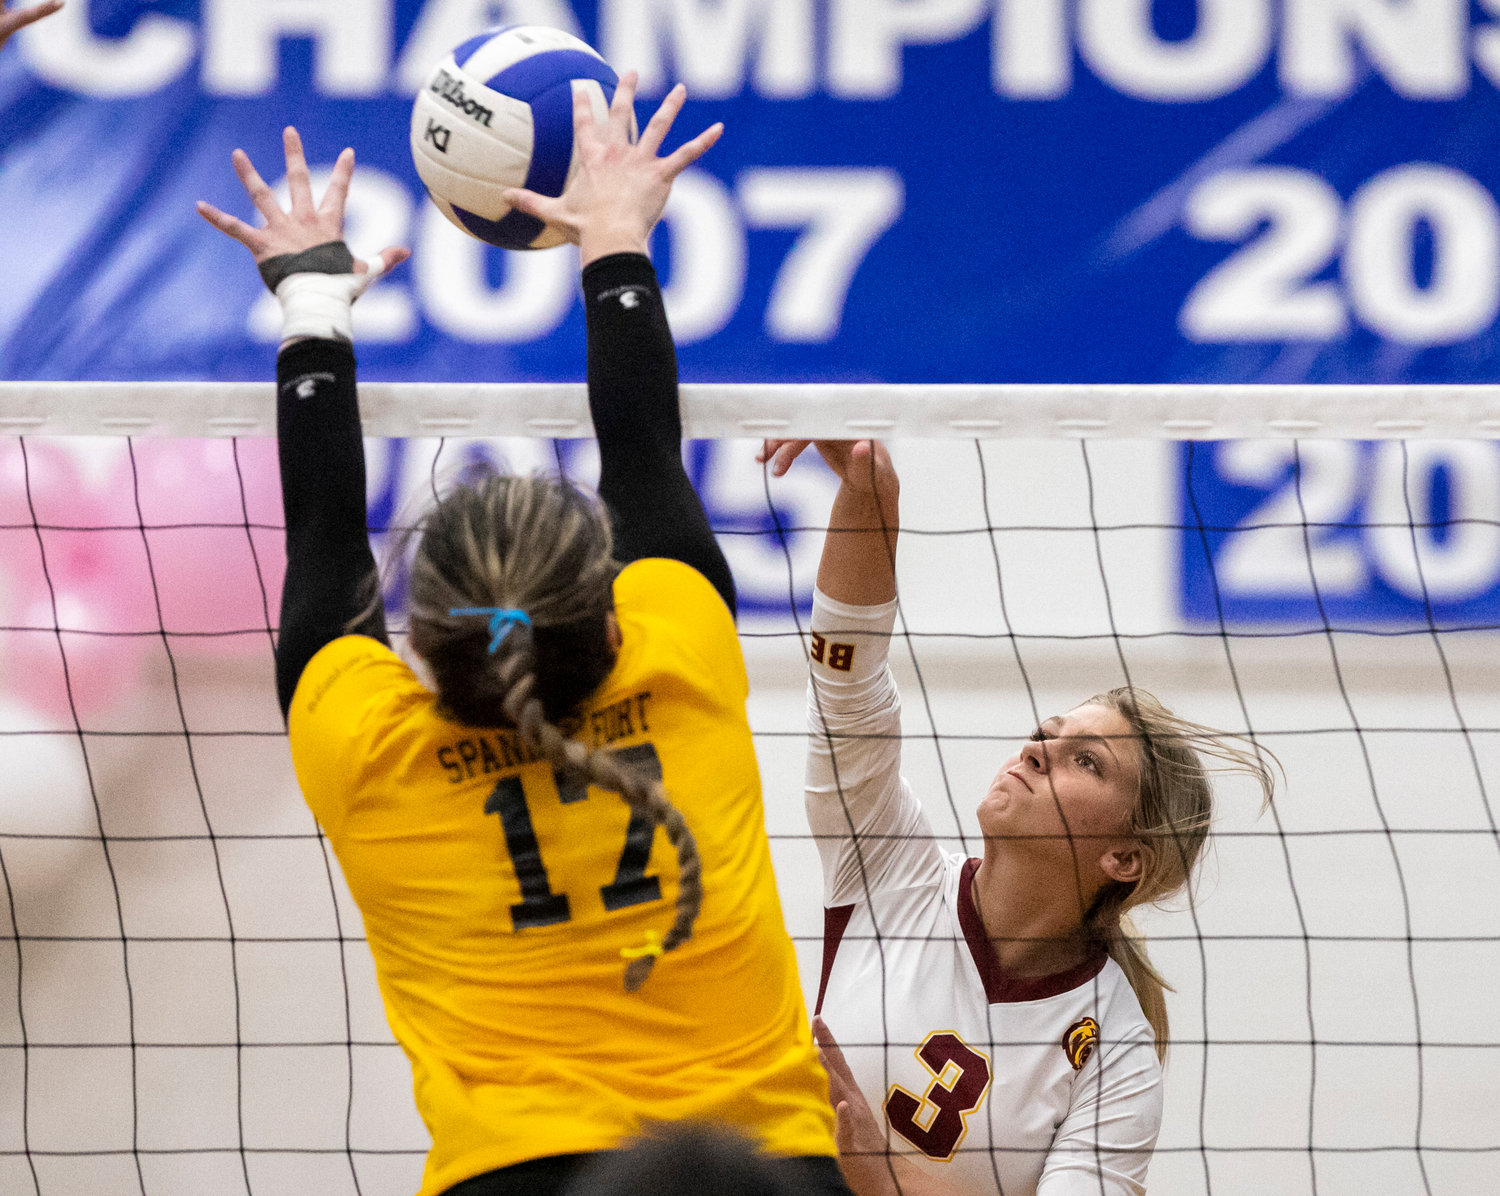 Robertsdale junior Madilyn Tatum attacks at the net during the Golden Bears’ semifinal match against Spanish Fort in the Class 6A Area 2 tournament Thursday night at Bayside Academy.